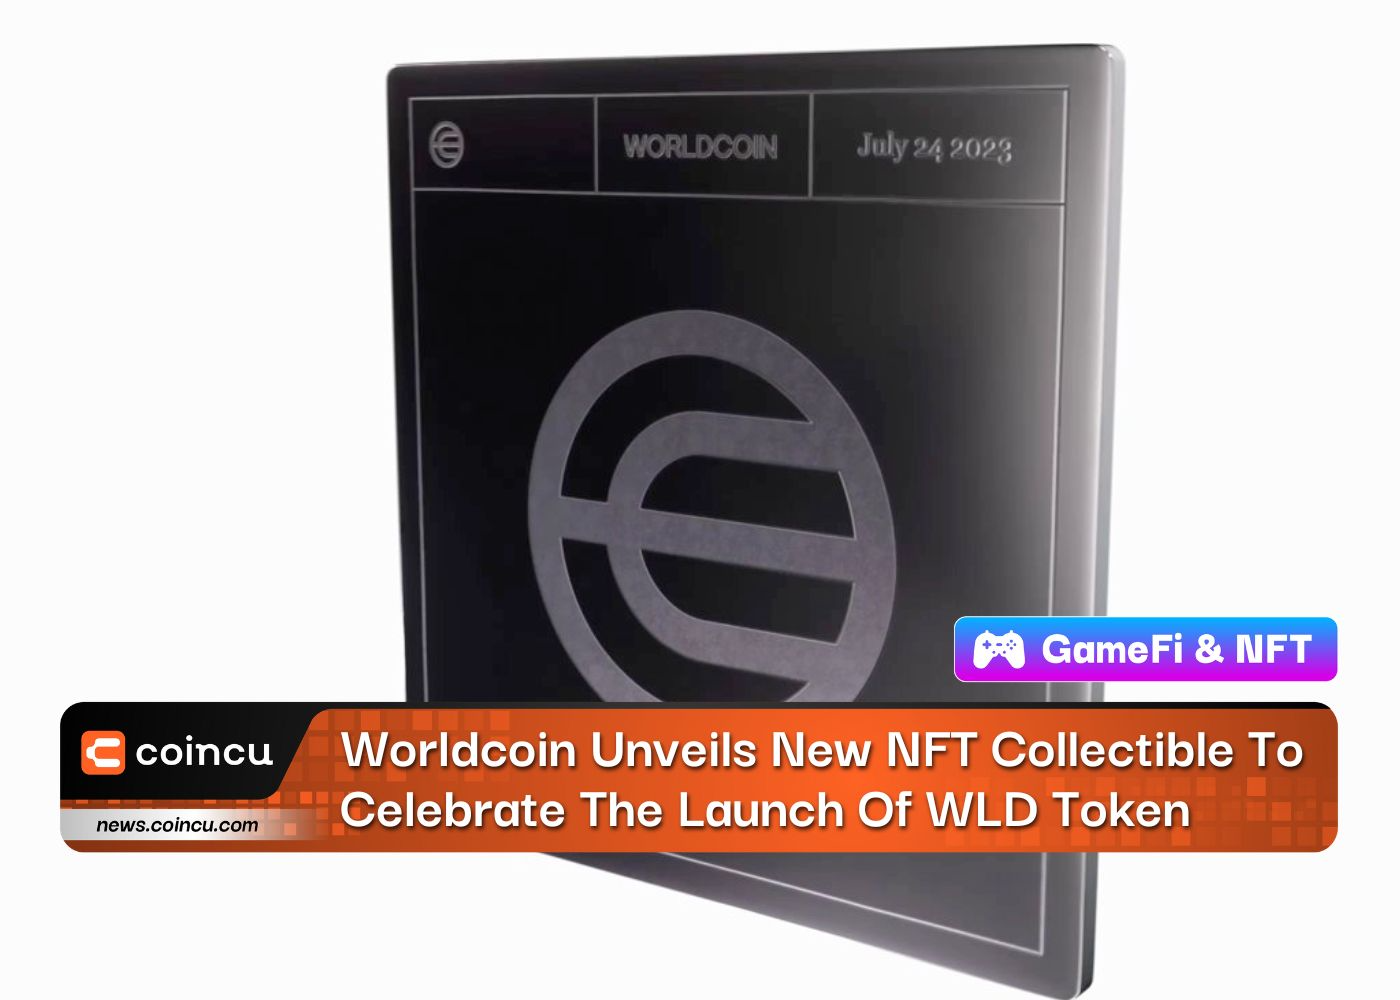 Worldcoin Unveils New NFT Collectible To Celebrate The Launch Of WLD Token